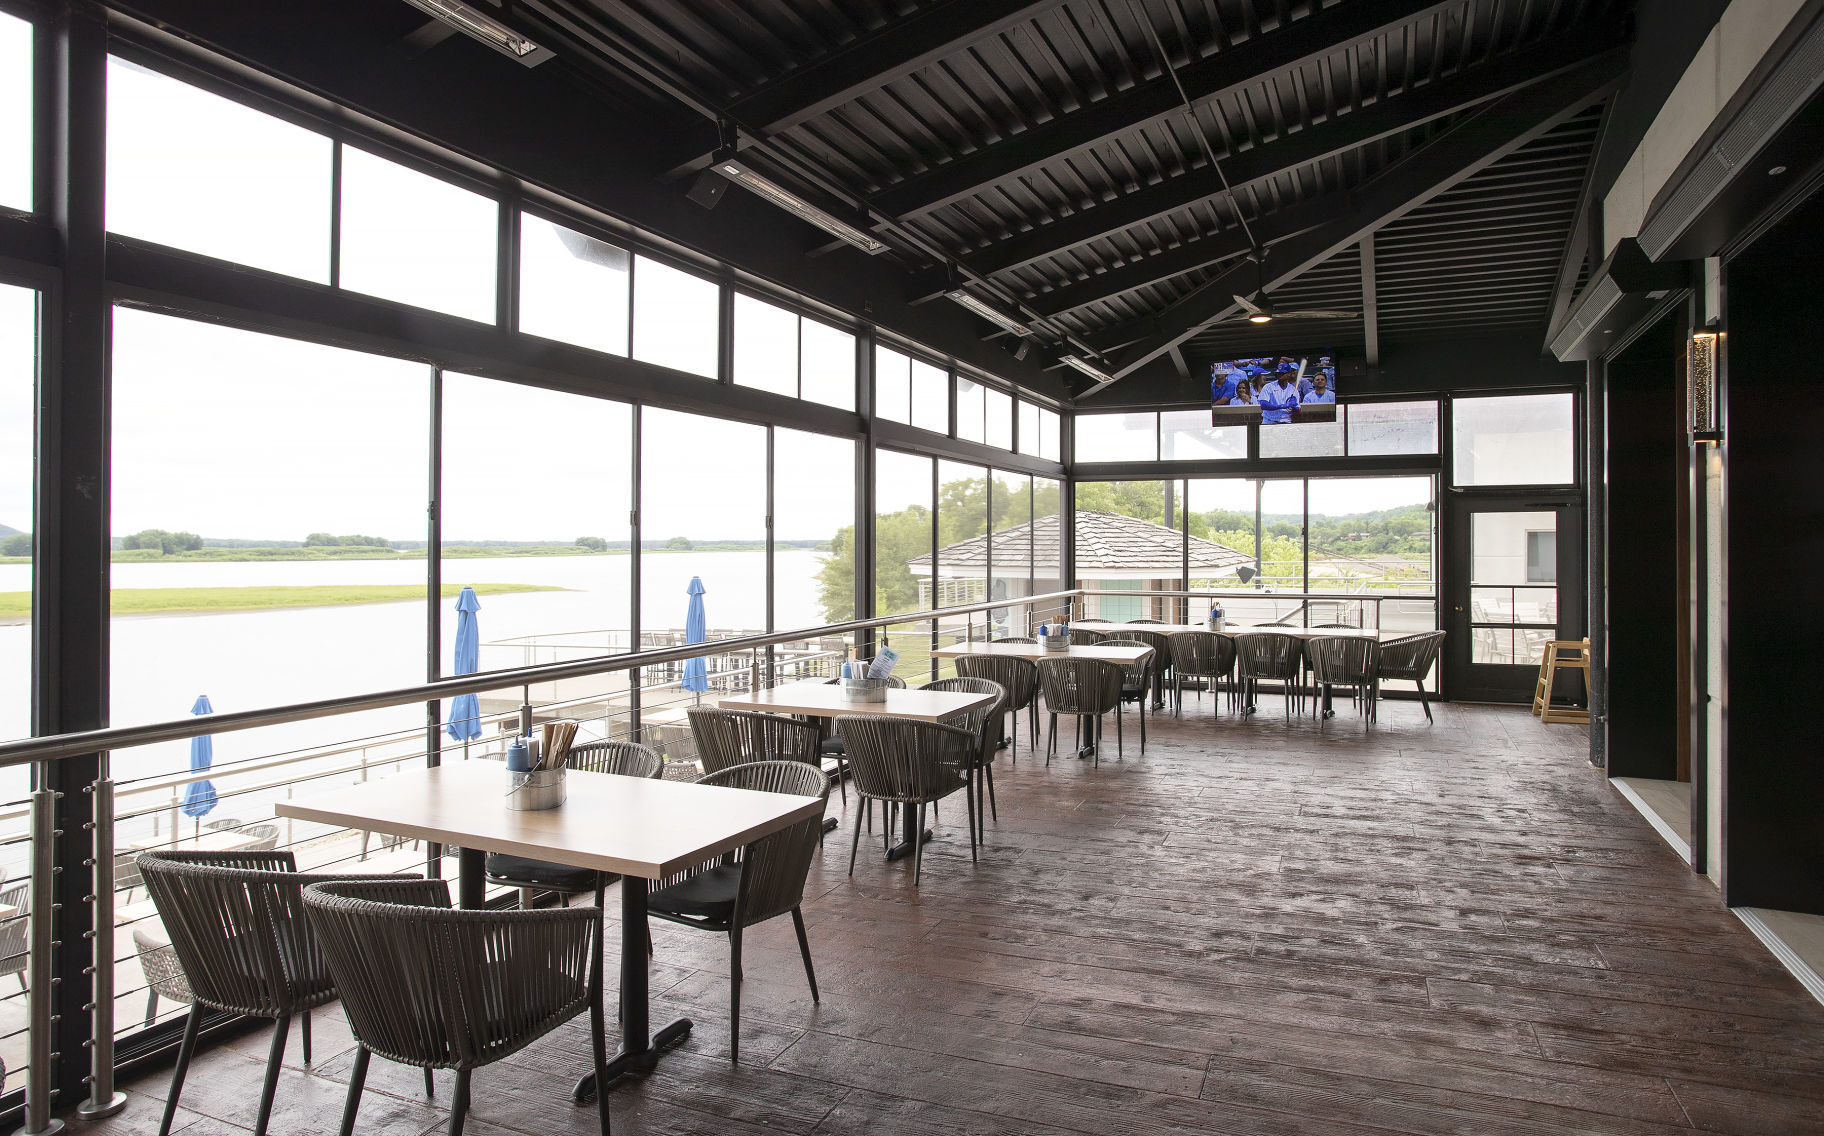 The enclosed patio of Off Shore Bar & Grilll in Bellevue, Iowa. PHOTO CREDIT: Stephen Gassman